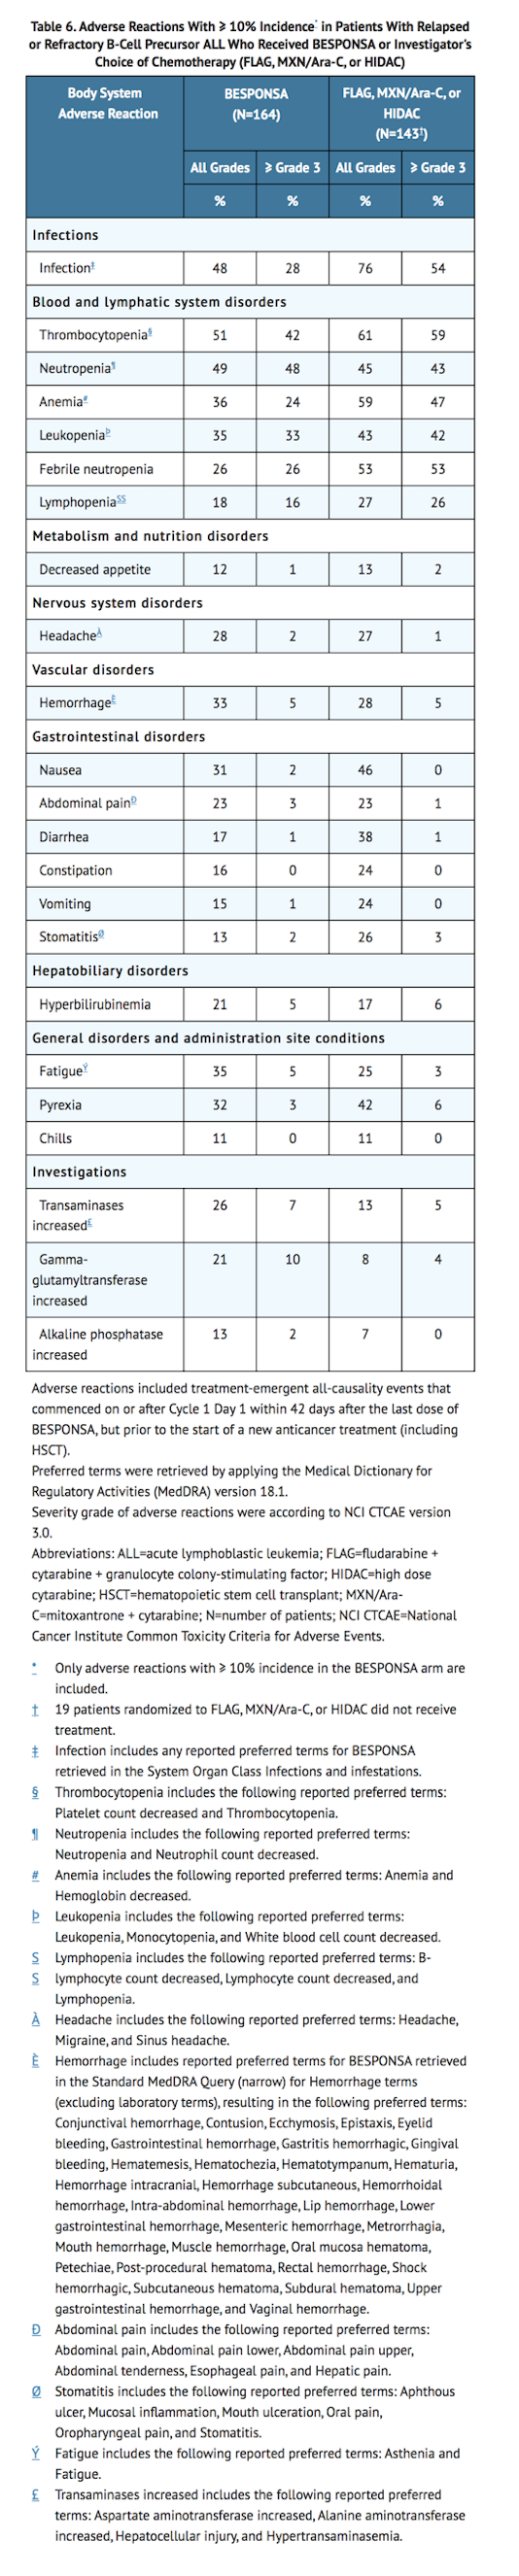 File:Inotuzumab Ozogamicin Adverse Reactions Table 1.png